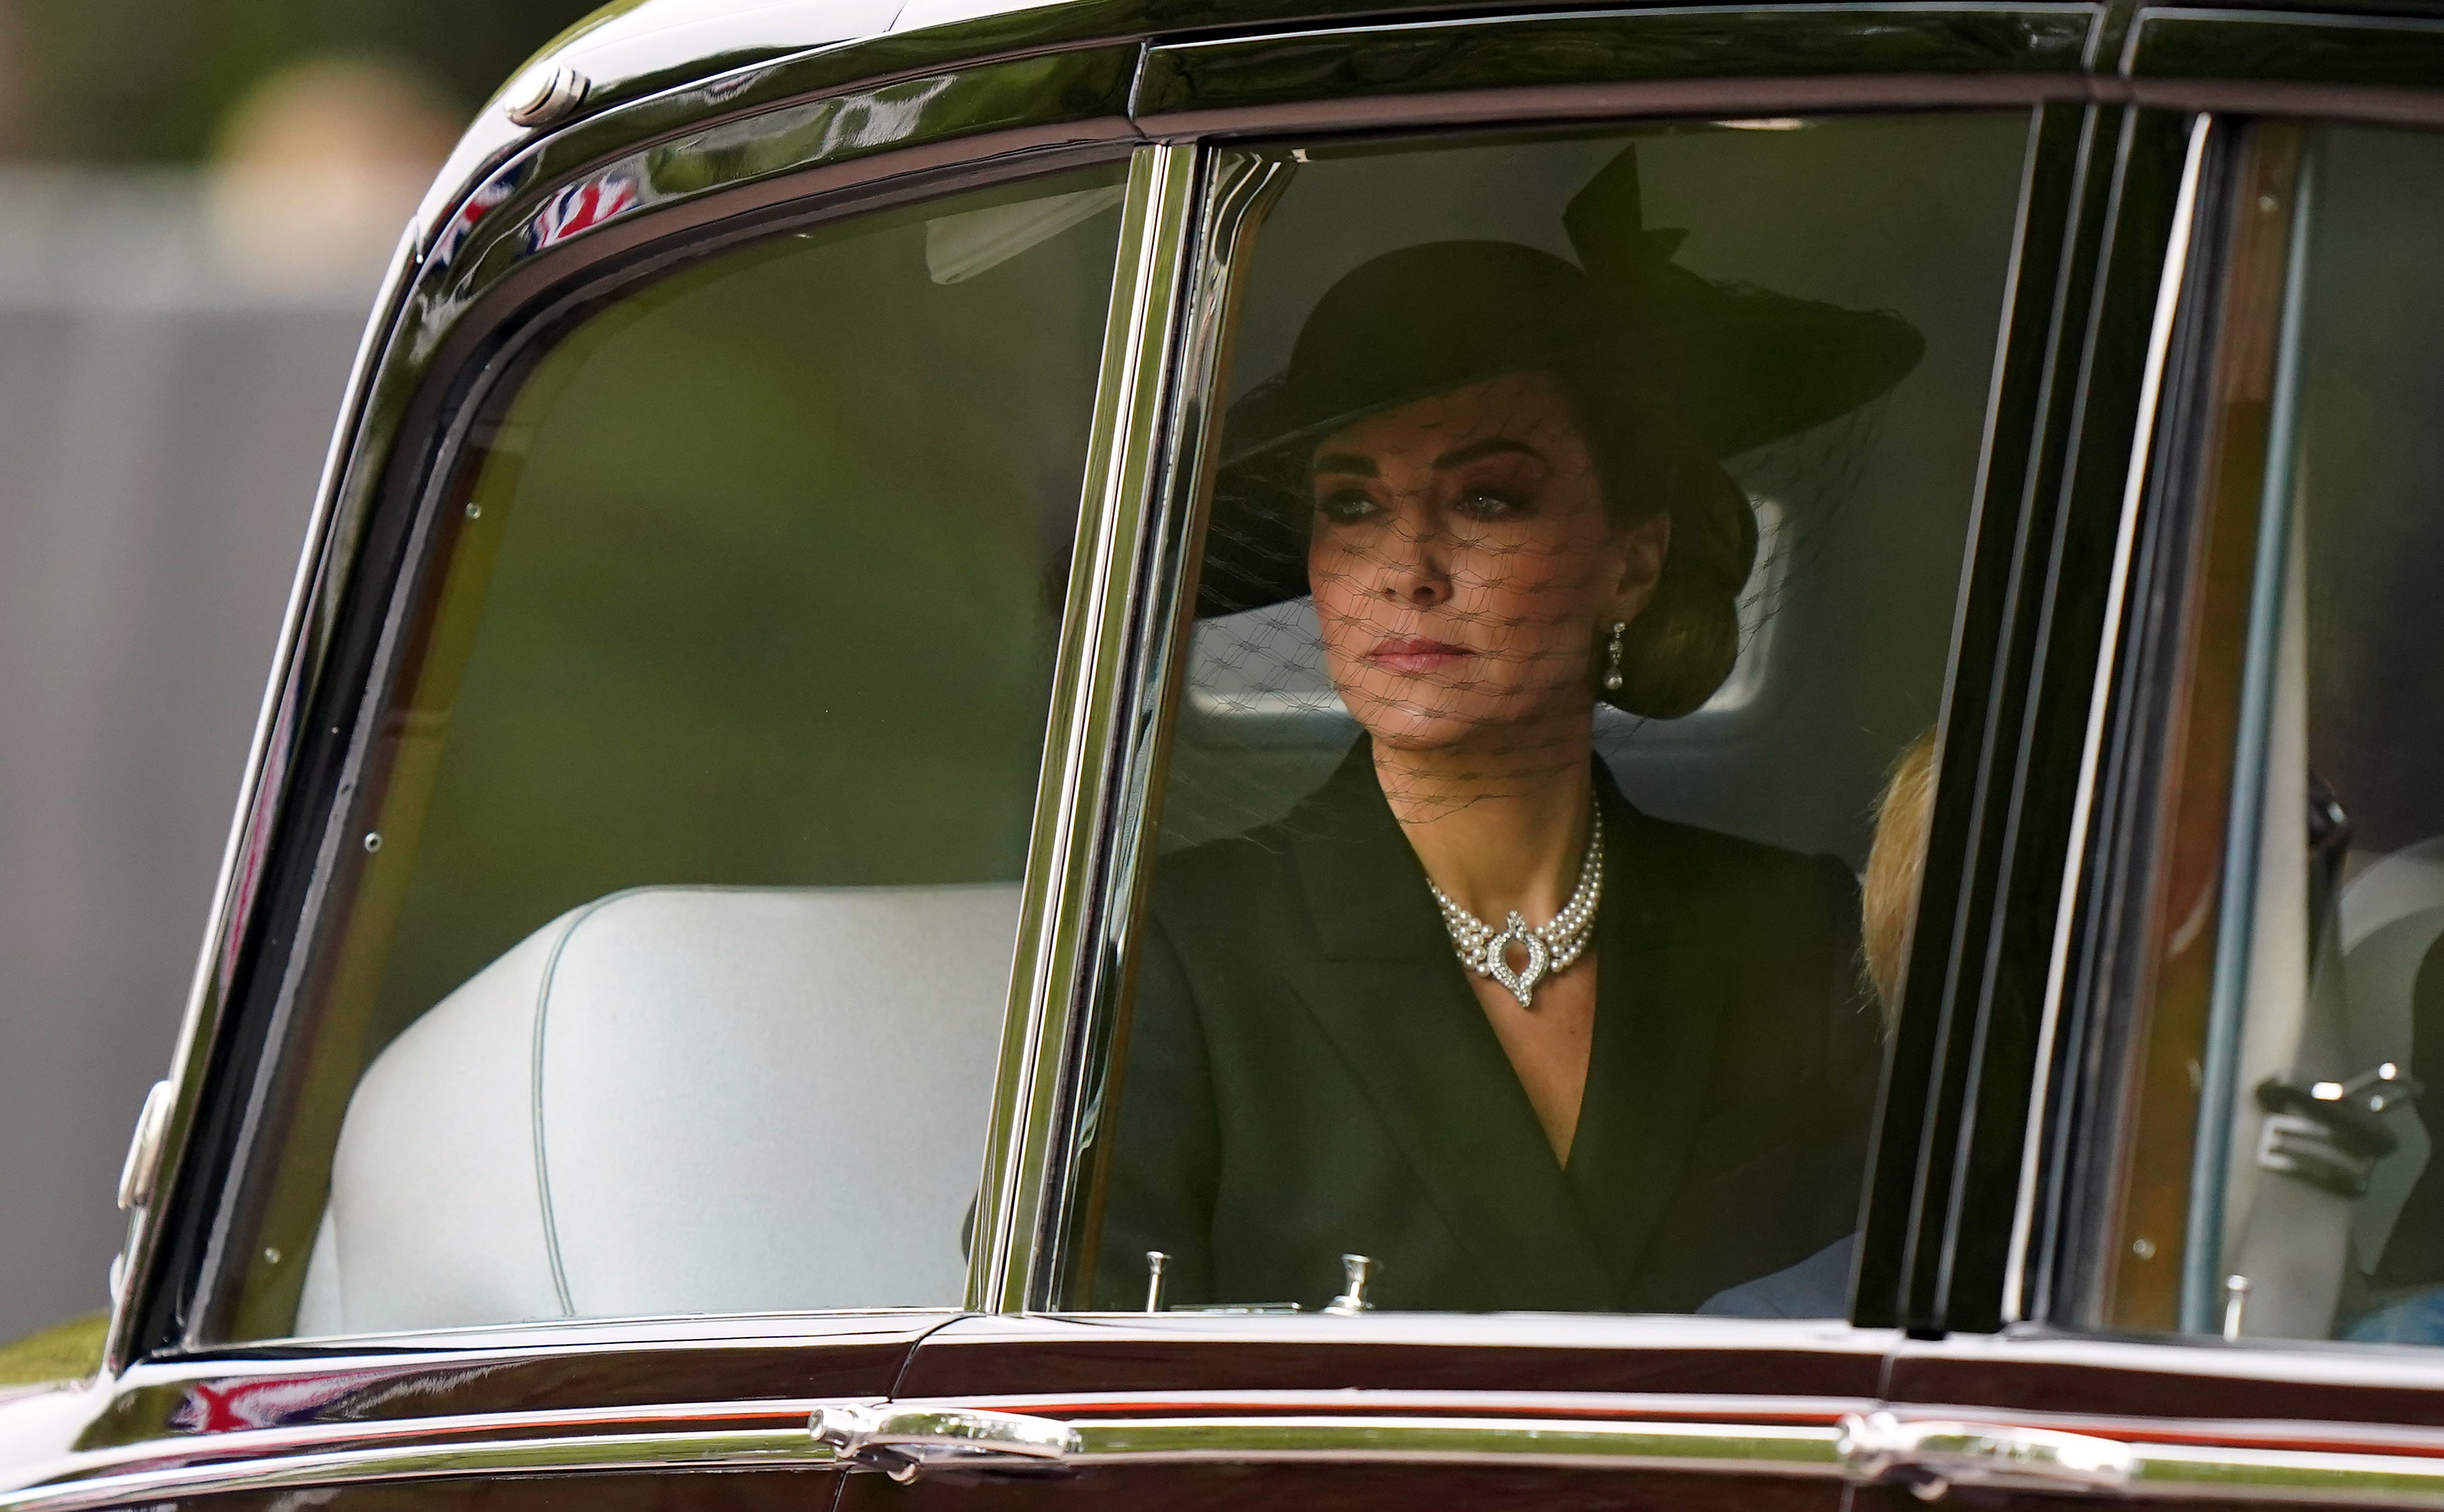 The Princess of Wales travels to the funeral (Tim Goode/PA)